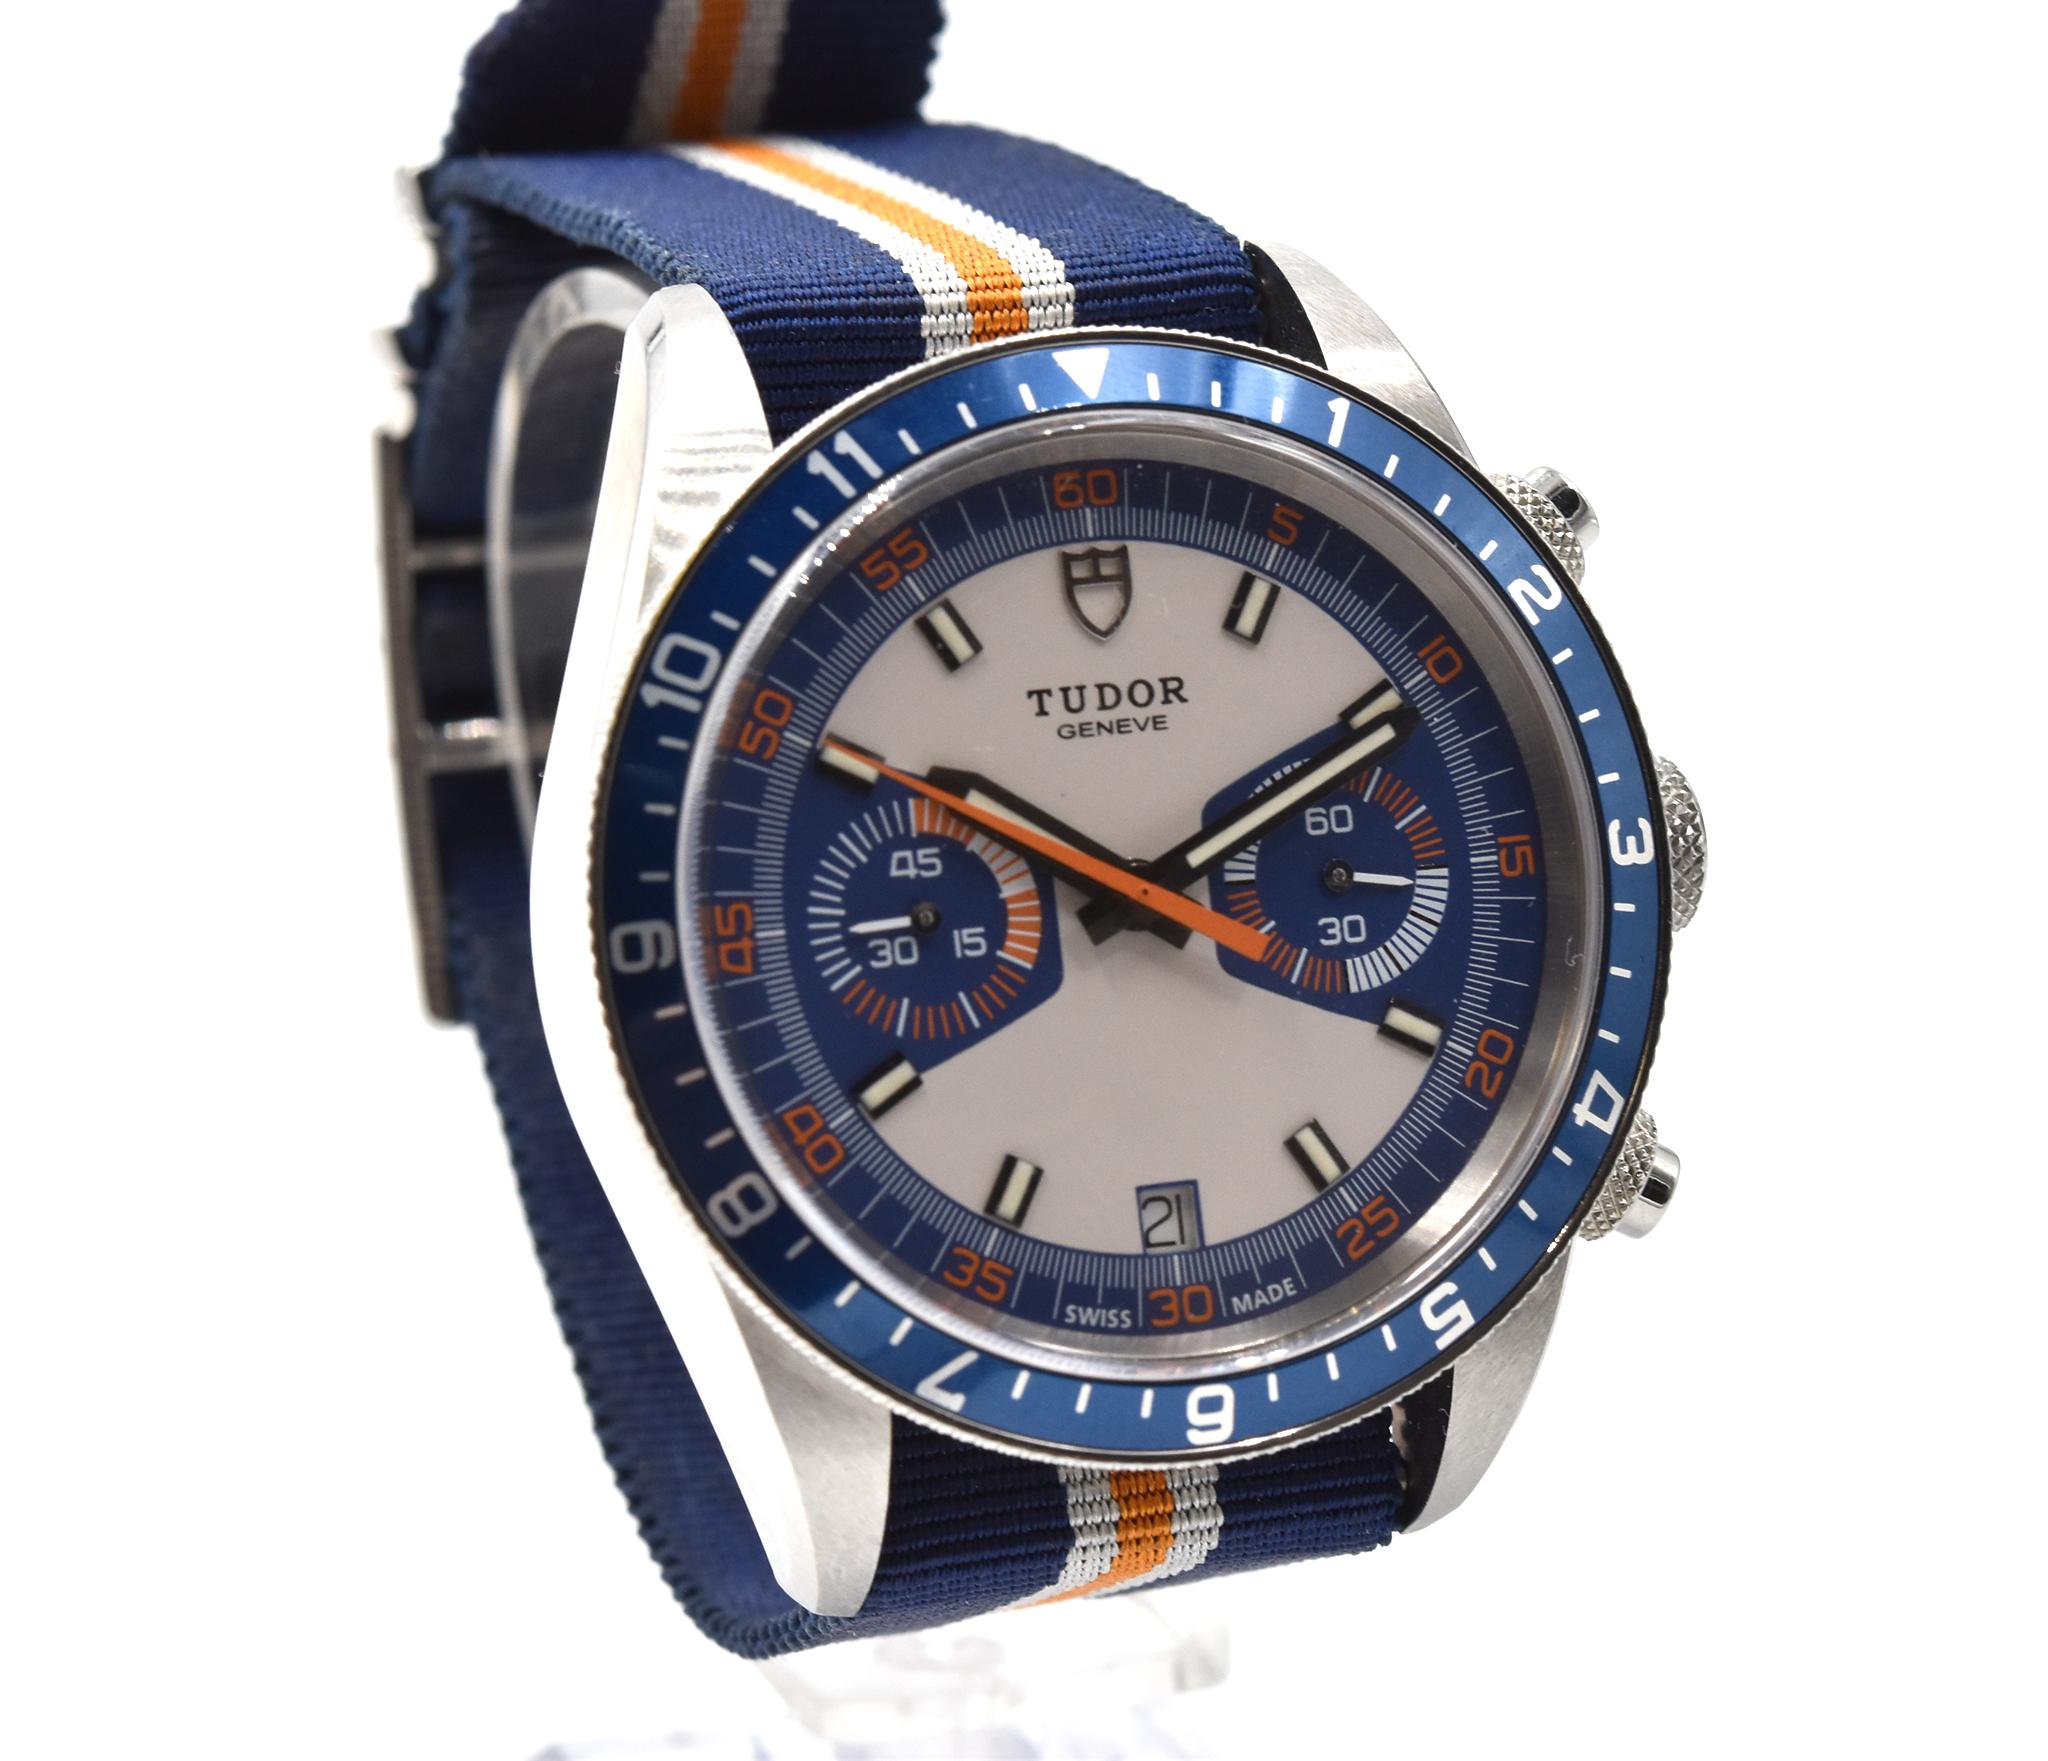 Movement: automatic
Function: hours, minutes, seconds, chronograph, date
Case: round 42mm stainless steel case, blue insert dive bezel, screw-down crown and pushers, sapphire protective crystal, water resistant to 100 meters 
Band: factory blue,